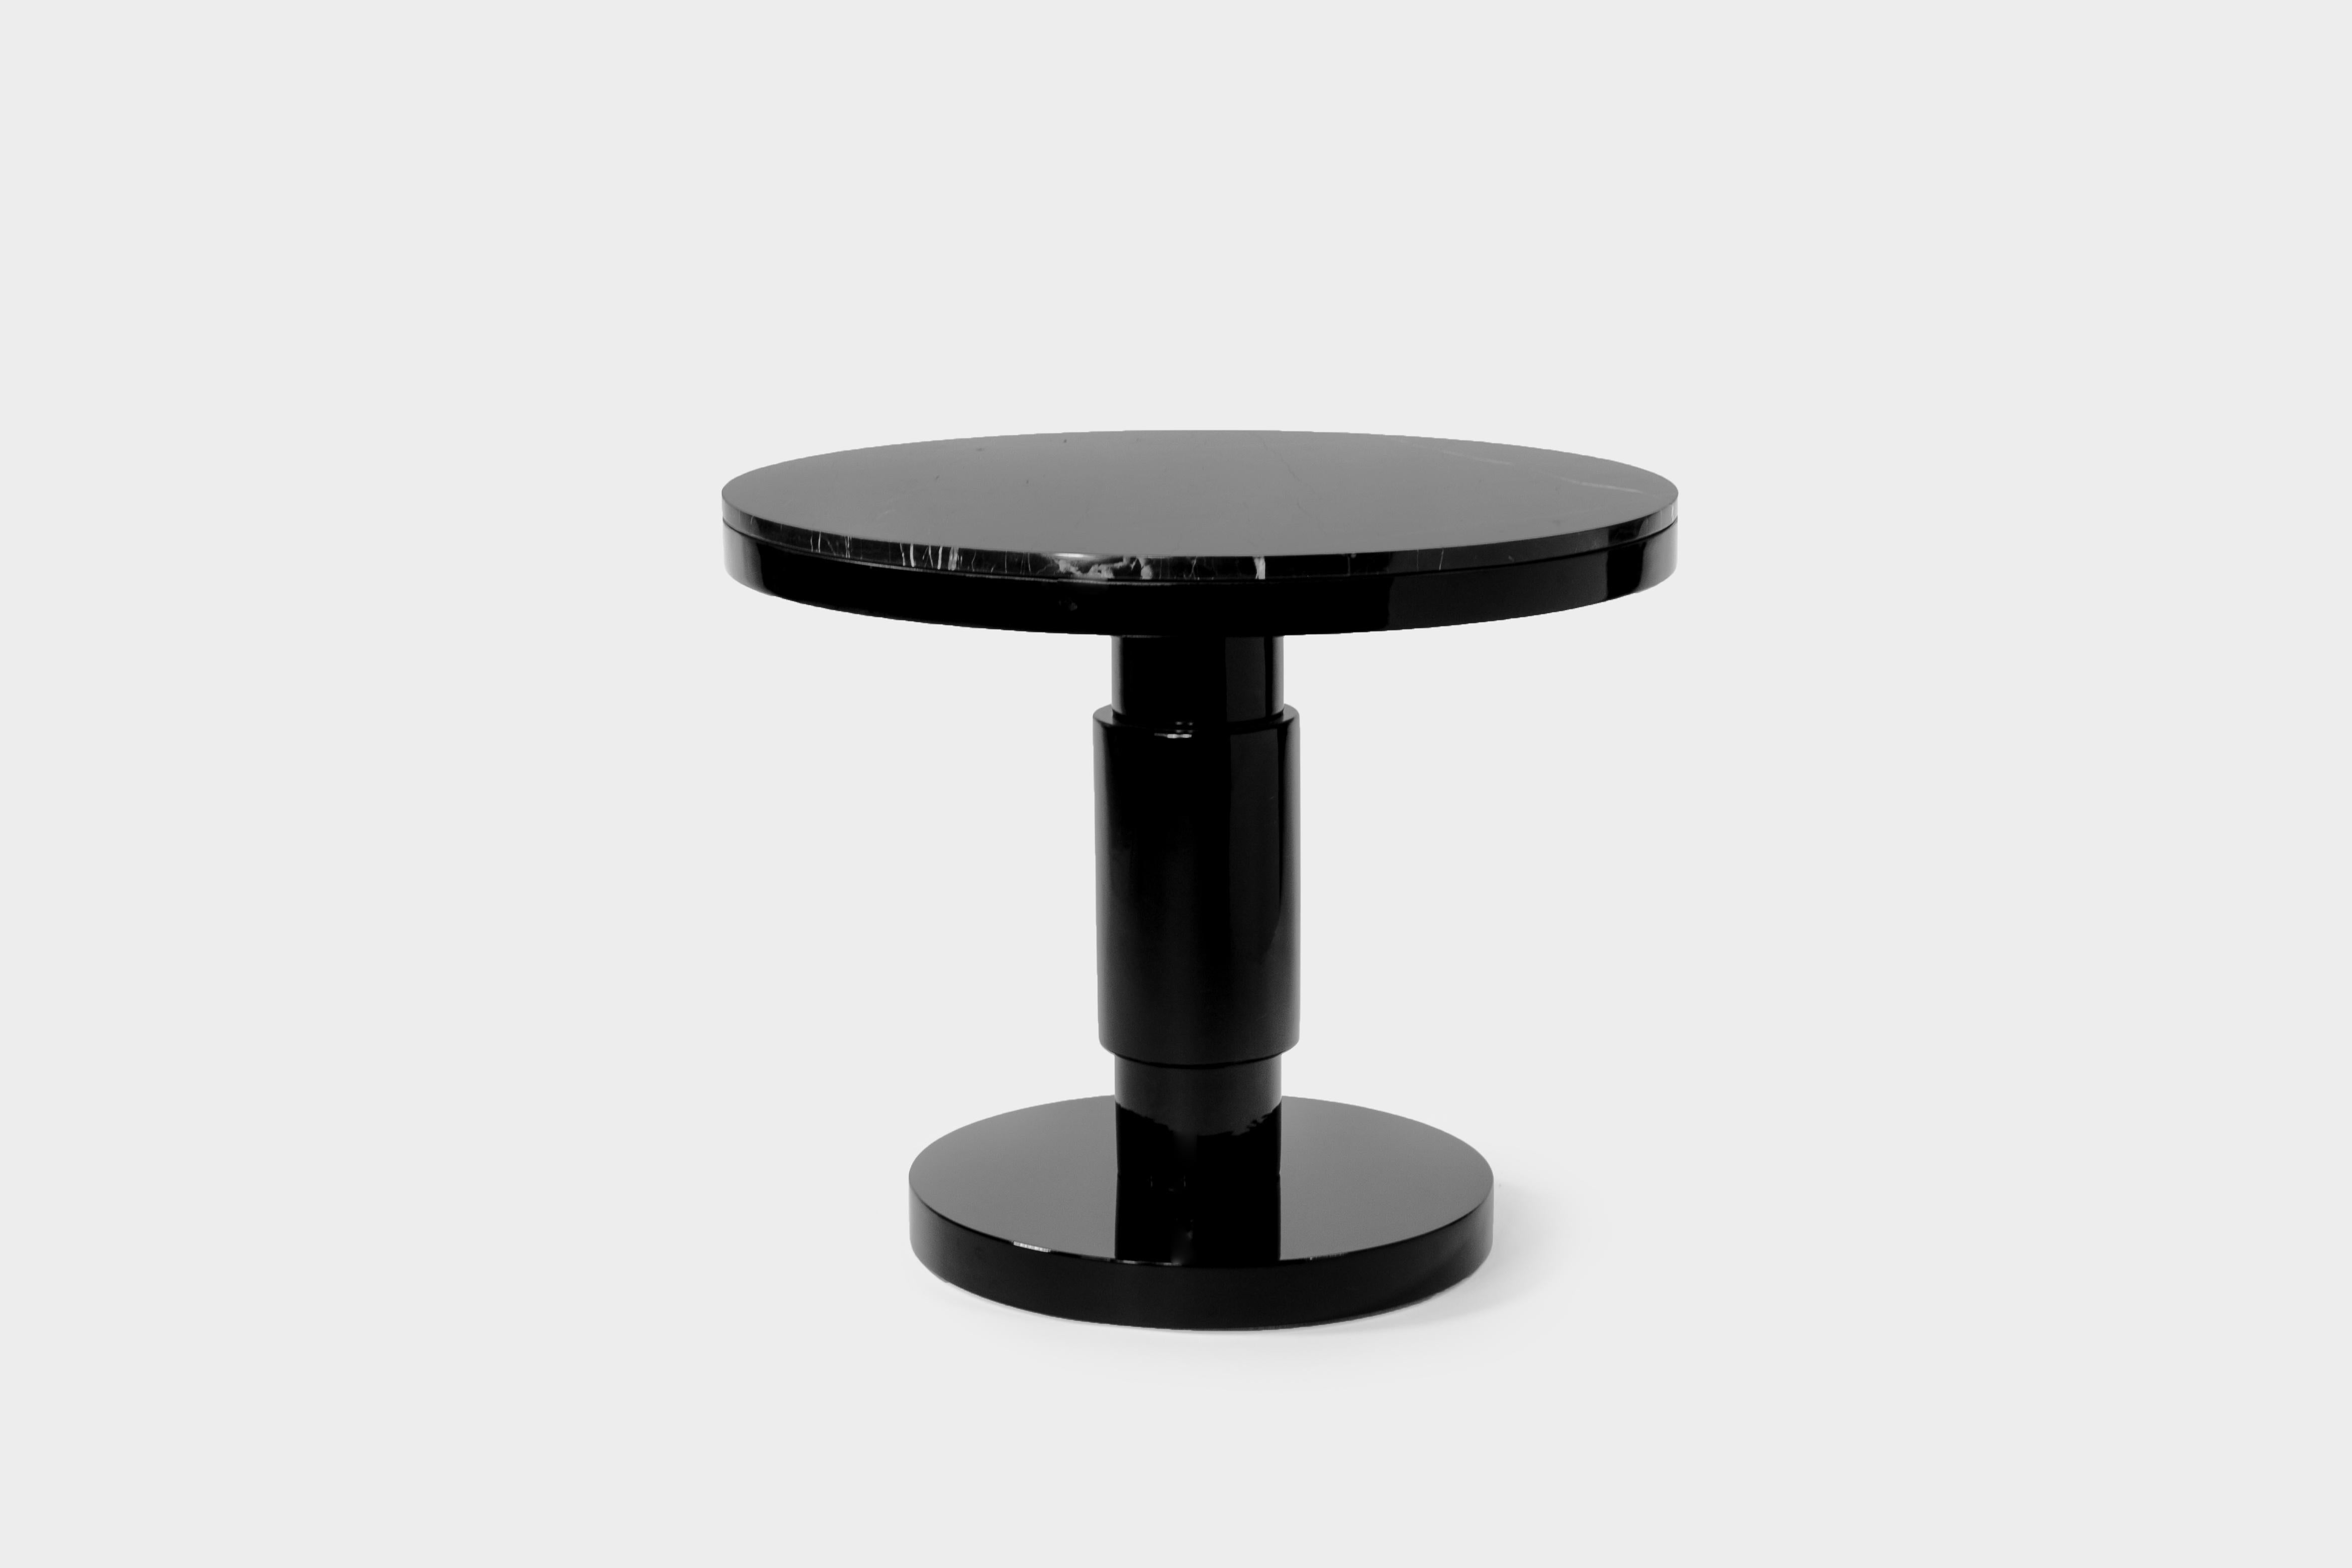 Ceramic and marble large coffee table by Eric Willemart
Materials: Top: Polished Nero Marquina marble plate embedded in a
black lacquered wooden tray
Body: Handcrafted ceramic glazed in black
Base: Black lacquered wood on an aluminum